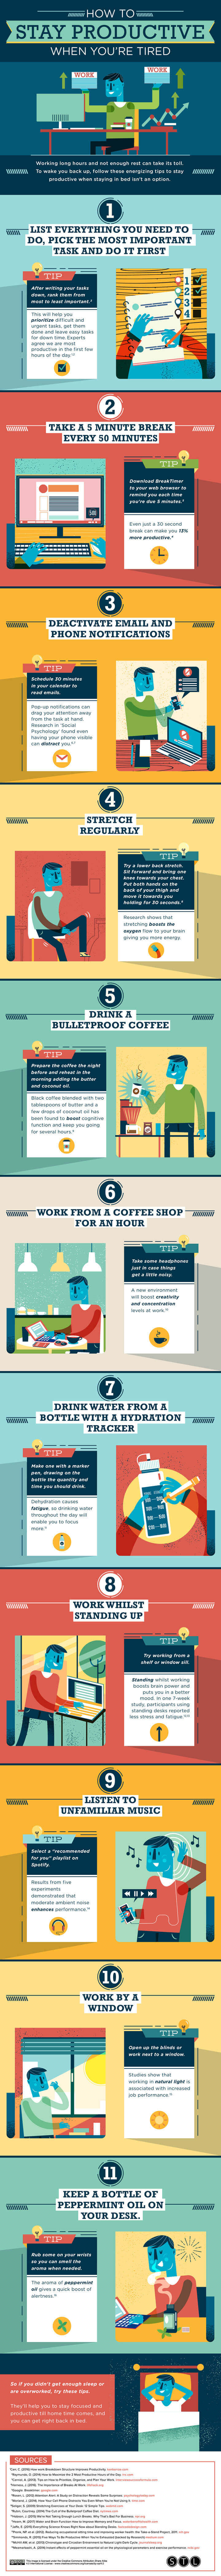 How to stay productive when you are tired